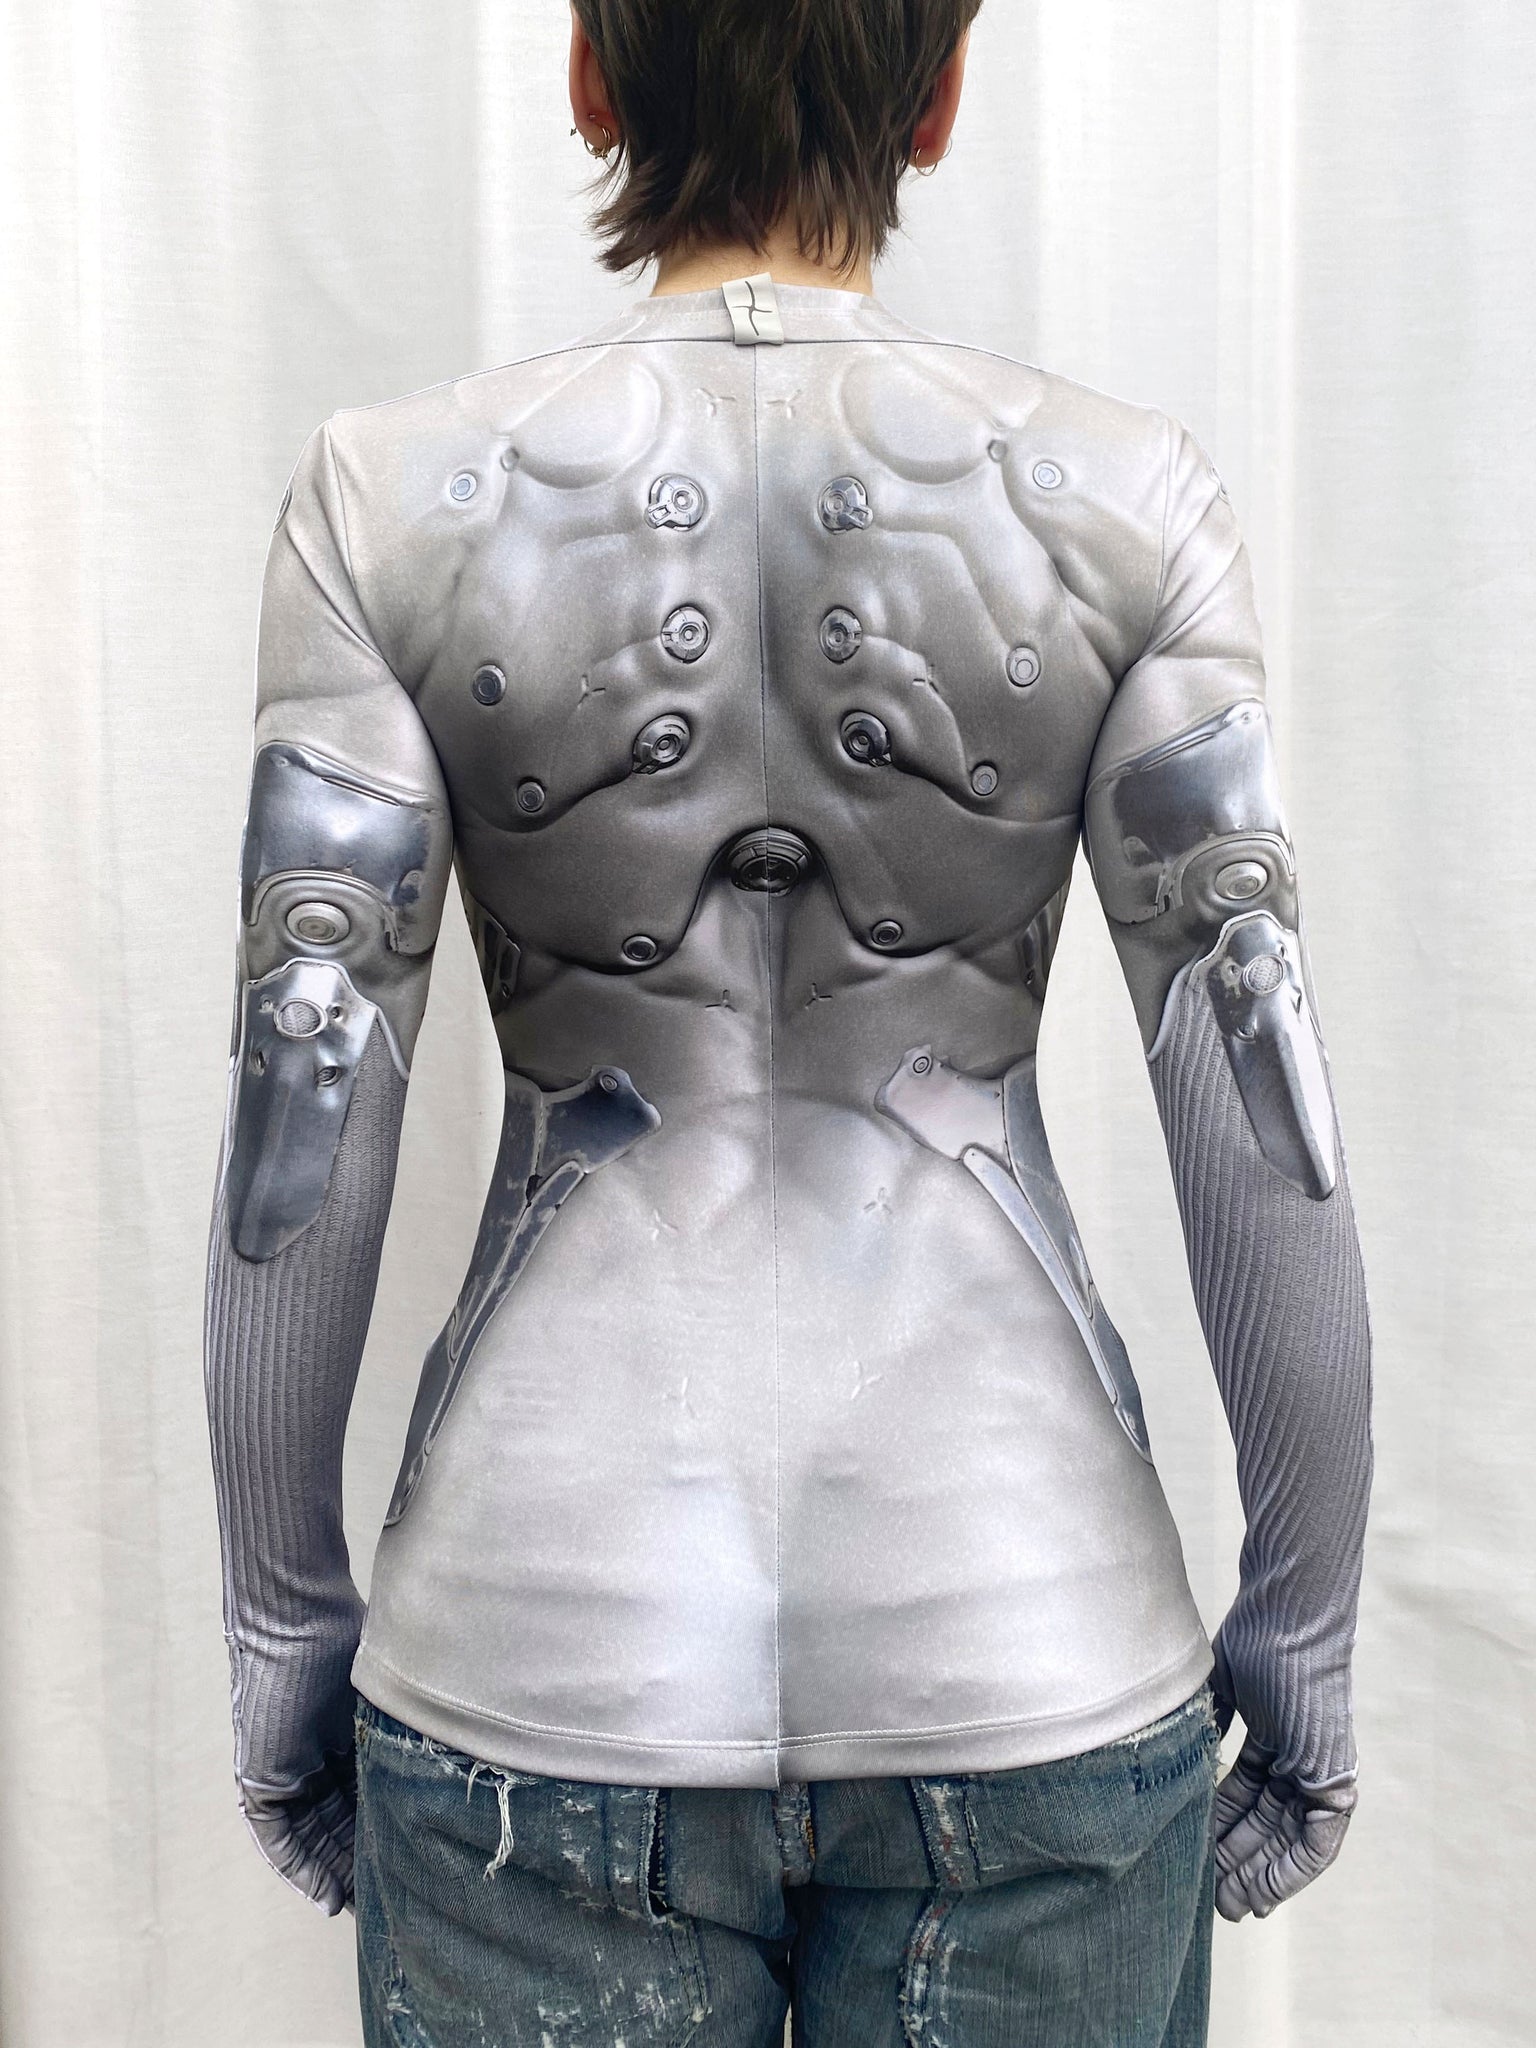 Mecanic Armored Top With Gloves